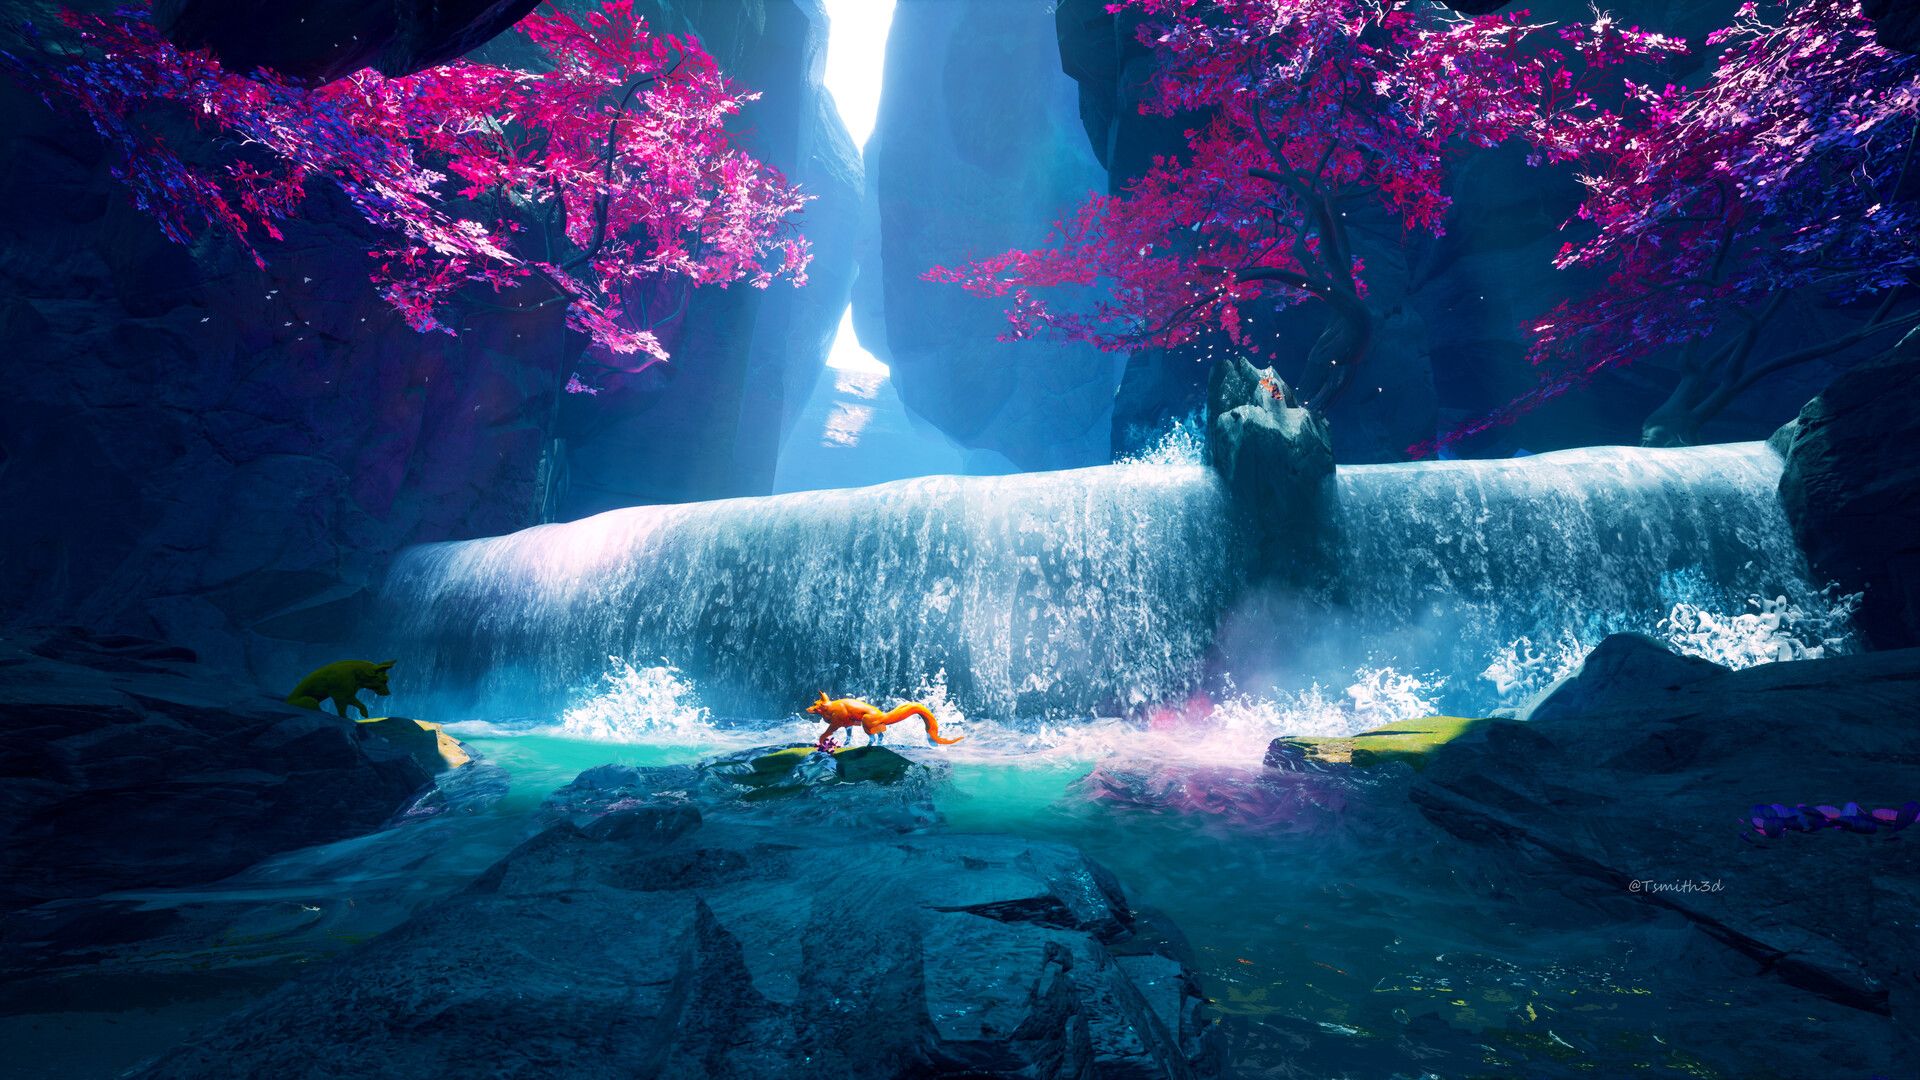 Purple waterfall by tyler smith software used unrealengine anime scenery wallpaper fantasy landscape waterfall paintings